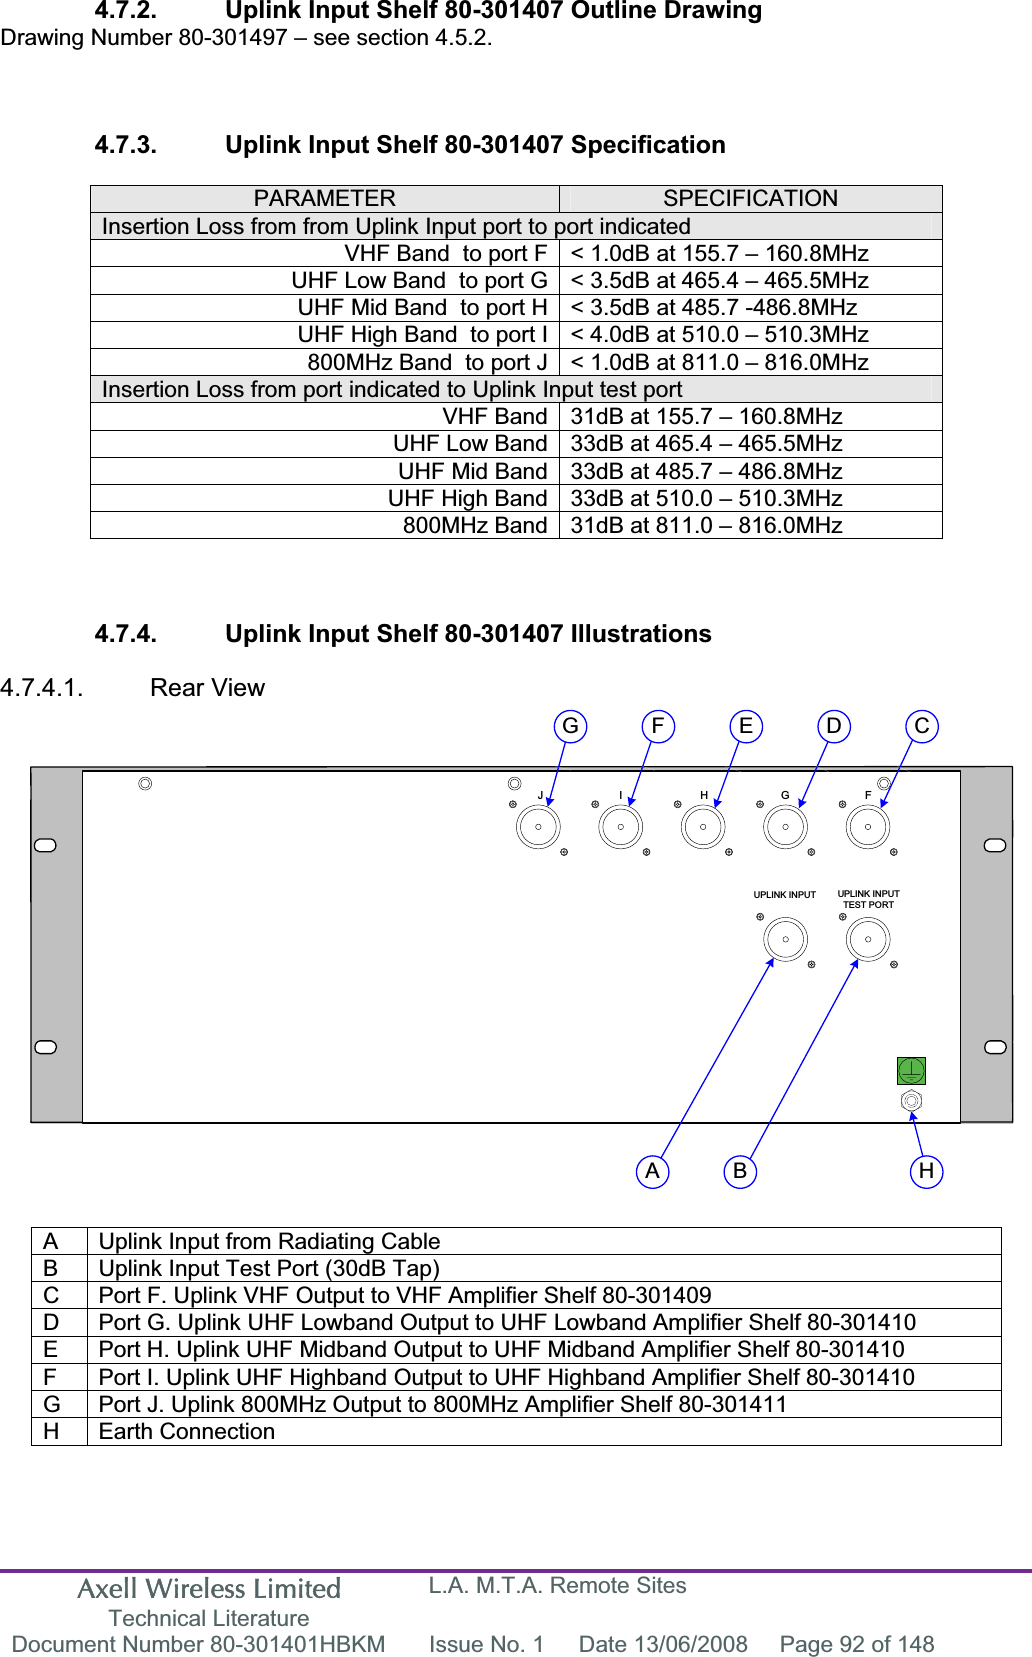 Axell Wireless Limited Technical Literature L.A. M.T.A. Remote Sites Document Number 80-301401HBKM  Issue No. 1  Date 13/06/2008  Page 92 of 148 UPLINK INPUT UPLINK INPUTTEST PORTFGHIJA B HCDEFG4.7.2.  Uplink Input Shelf 80-301407 Outline Drawing Drawing Number 80-301497 – see section 4.5.2. 4.7.3.  Uplink Input Shelf 80-301407 Specification PARAMETER SPECIFICATIONInsertion Loss from from Uplink Input port to port indicatedVHF Band  to port F &lt; 1.0dB at 155.7 – 160.8MHz UHF Low Band  to port G &lt; 3.5dB at 465.4 – 465.5MHz UHF Mid Band  to port H &lt; 3.5dB at 485.7 -486.8MHz UHF High Band  to port I &lt; 4.0dB at 510.0 – 510.3MHz 800MHz Band  to port J &lt; 1.0dB at 811.0 – 816.0MHz  Insertion Loss from port indicated to Uplink Input test port VHF Band 31dB at 155.7 – 160.8MHz UHF Low Band 33dB at 465.4 – 465.5MHz UHF Mid Band 33dB at 485.7 – 486.8MHz UHF High Band 33dB at 510.0 – 510.3MHz 800MHz Band 31dB at 811.0 – 816.0MHz 4.7.4.  Uplink Input Shelf 80-301407 Illustrations 4.7.4.1. Rear View A  Uplink Input from Radiating Cable B  Uplink Input Test Port (30dB Tap) C  Port F. Uplink VHF Output to VHF Amplifier Shelf 80-301409 D  Port G. Uplink UHF Lowband Output to UHF Lowband Amplifier Shelf 80-301410 E  Port H. Uplink UHF Midband Output to UHF Midband Amplifier Shelf 80-301410 F  Port I. Uplink UHF Highband Output to UHF Highband Amplifier Shelf 80-301410 G  Port J. Uplink 800MHz Output to 800MHz Amplifier Shelf 80-301411 H Earth Connection 